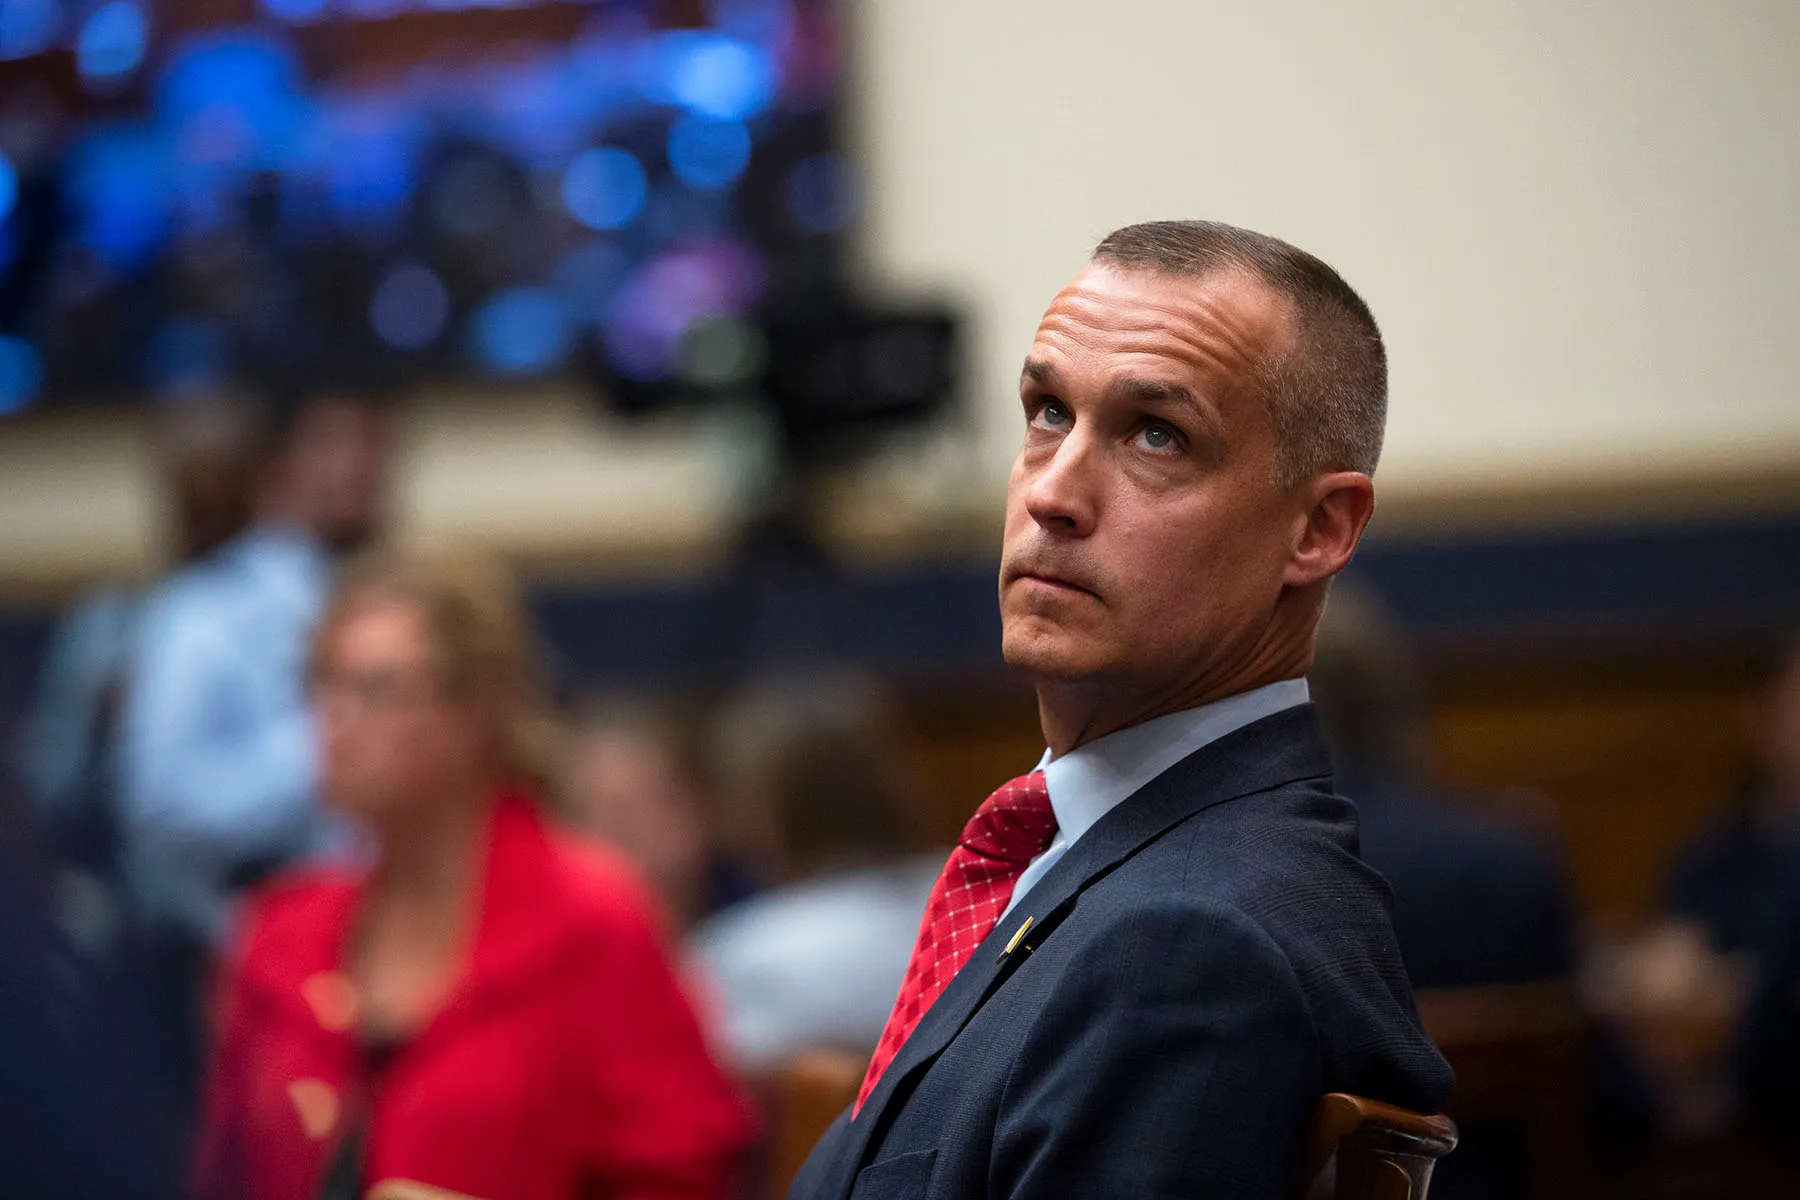 Corey Lewandowski, the former campaign manager for President Donald Trump, testifies before the House Judiciary Committee.